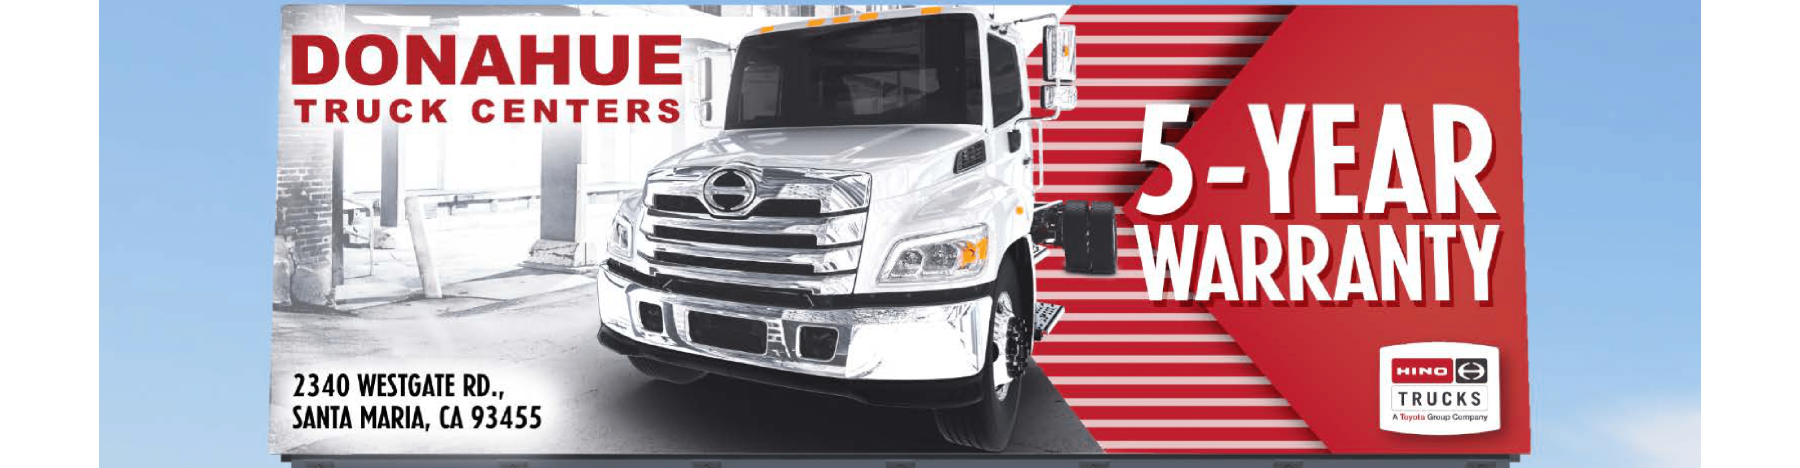 5 year warranty - Donahue Truck Centers